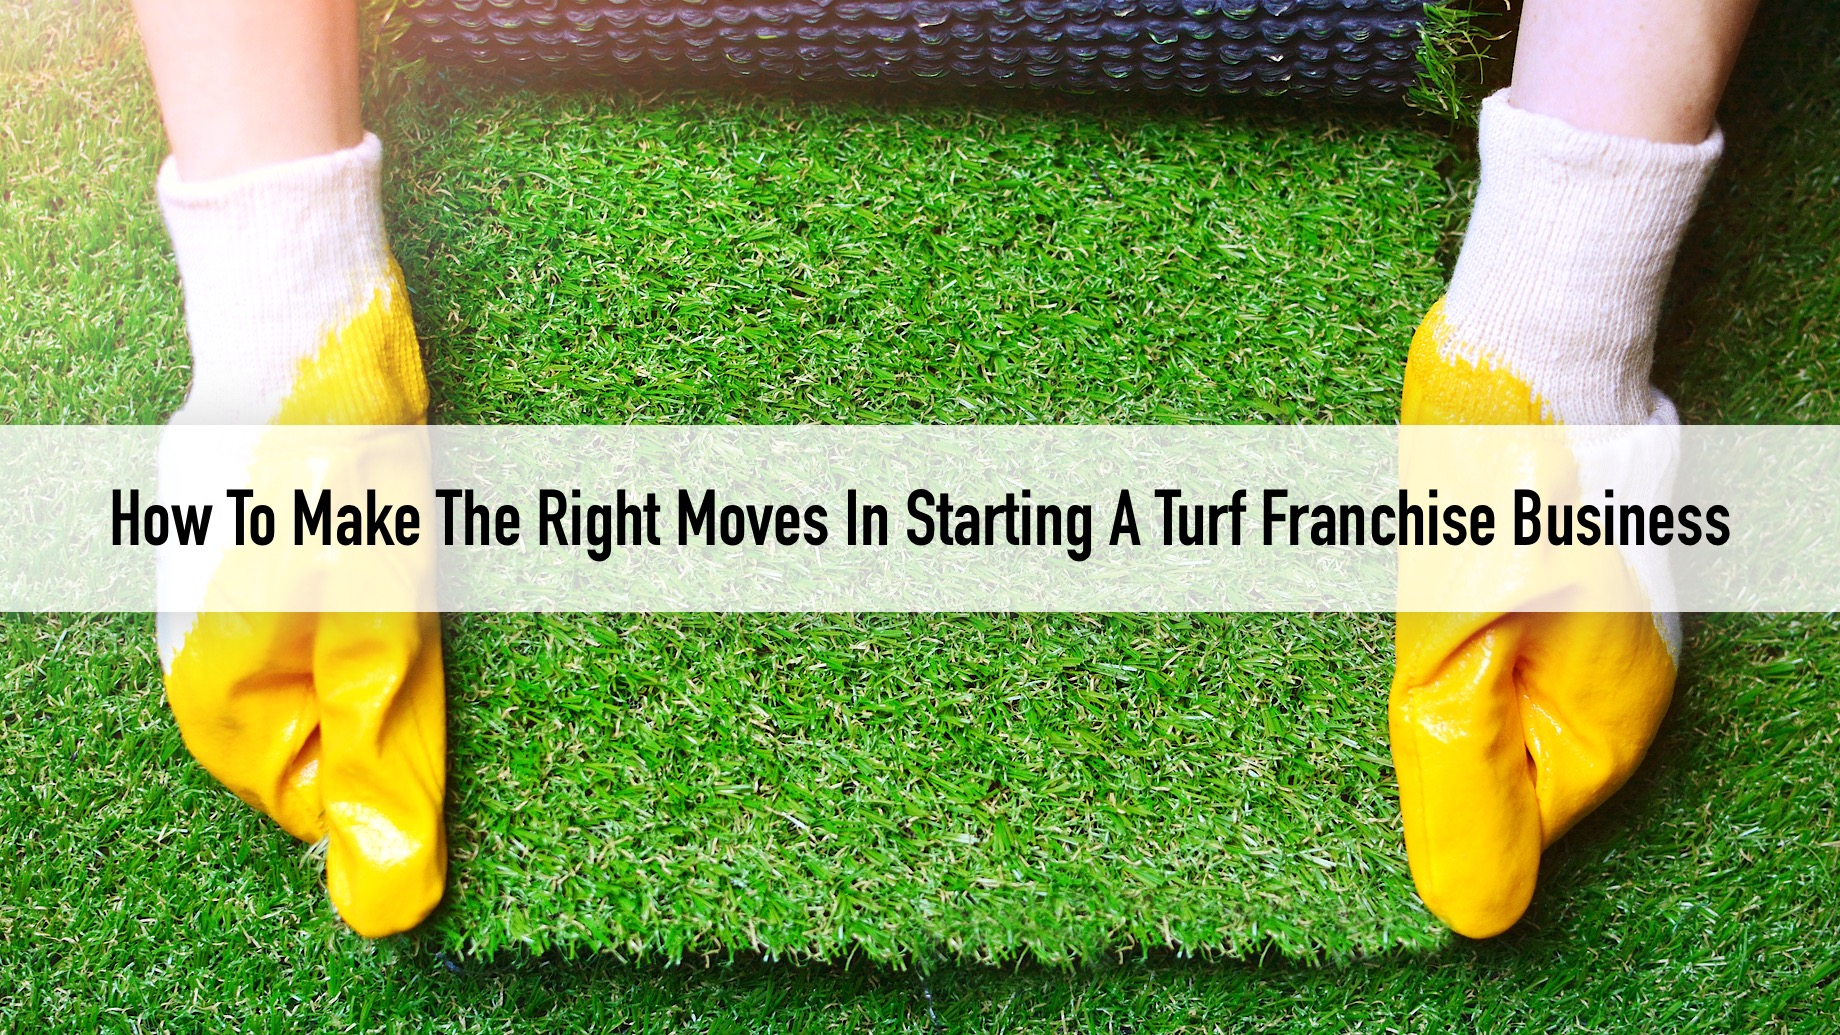 How To Make The Right Moves In Starting A Turf Franchise Business